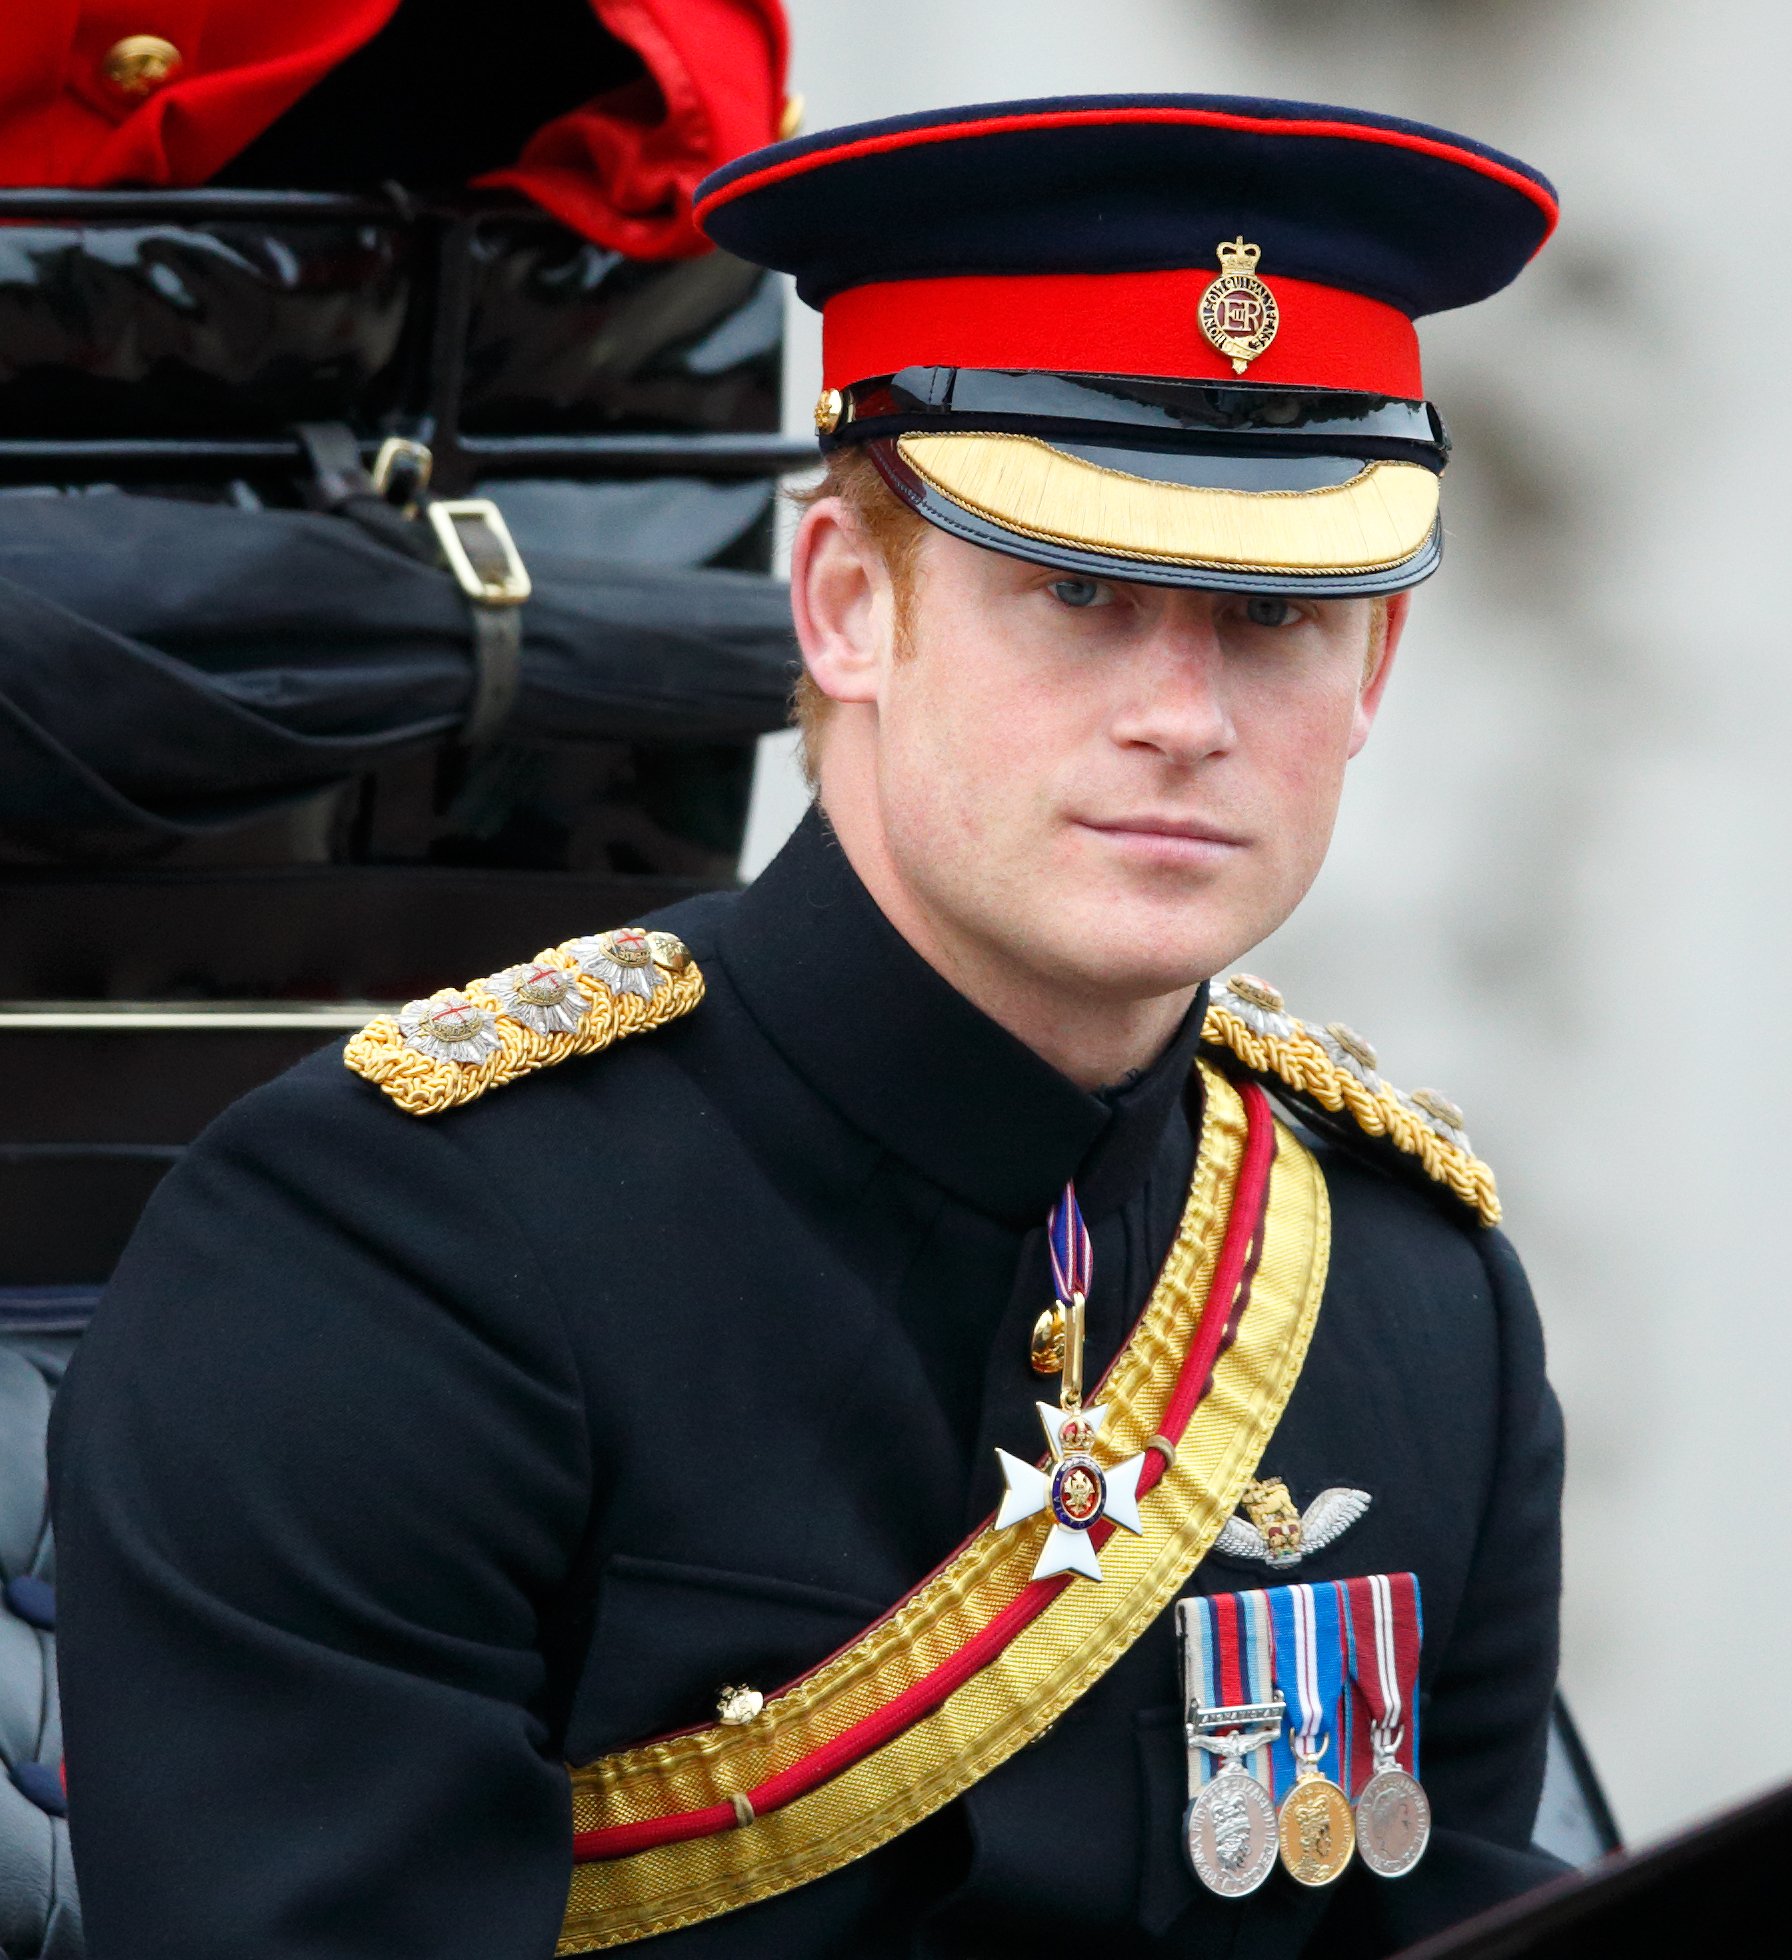 Prince Harry travels down The Mall in a horse-drawn carriage during Trooping the Colour on June 13, 2015, in London, England. | Source: Getty Images